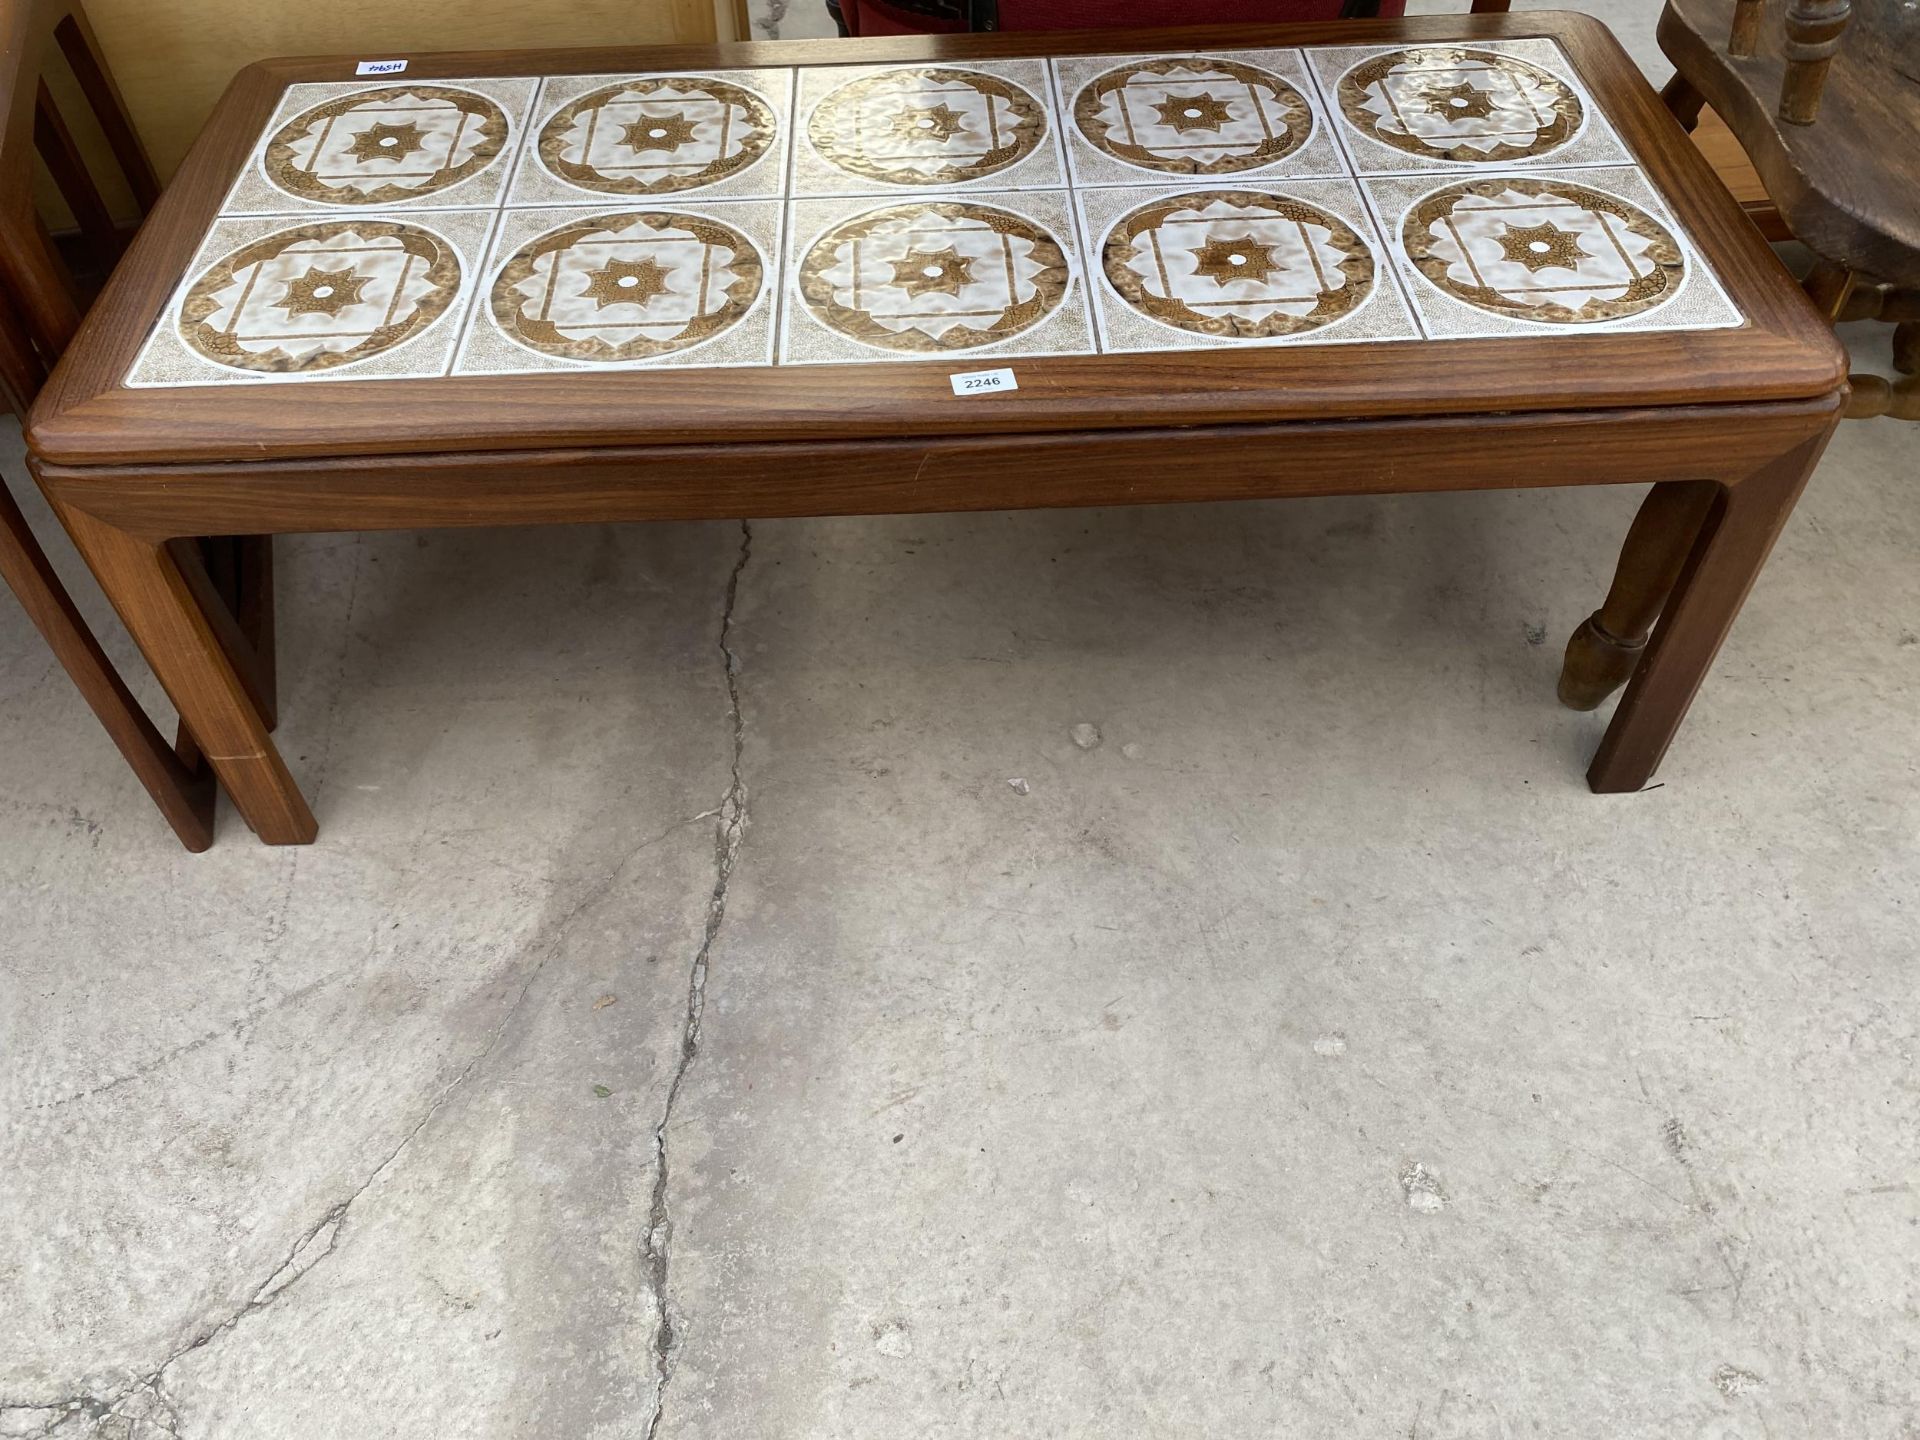 A RETRO TEAK COFFEE TABLE WITH INSET TILED TOP, 44 X 20"